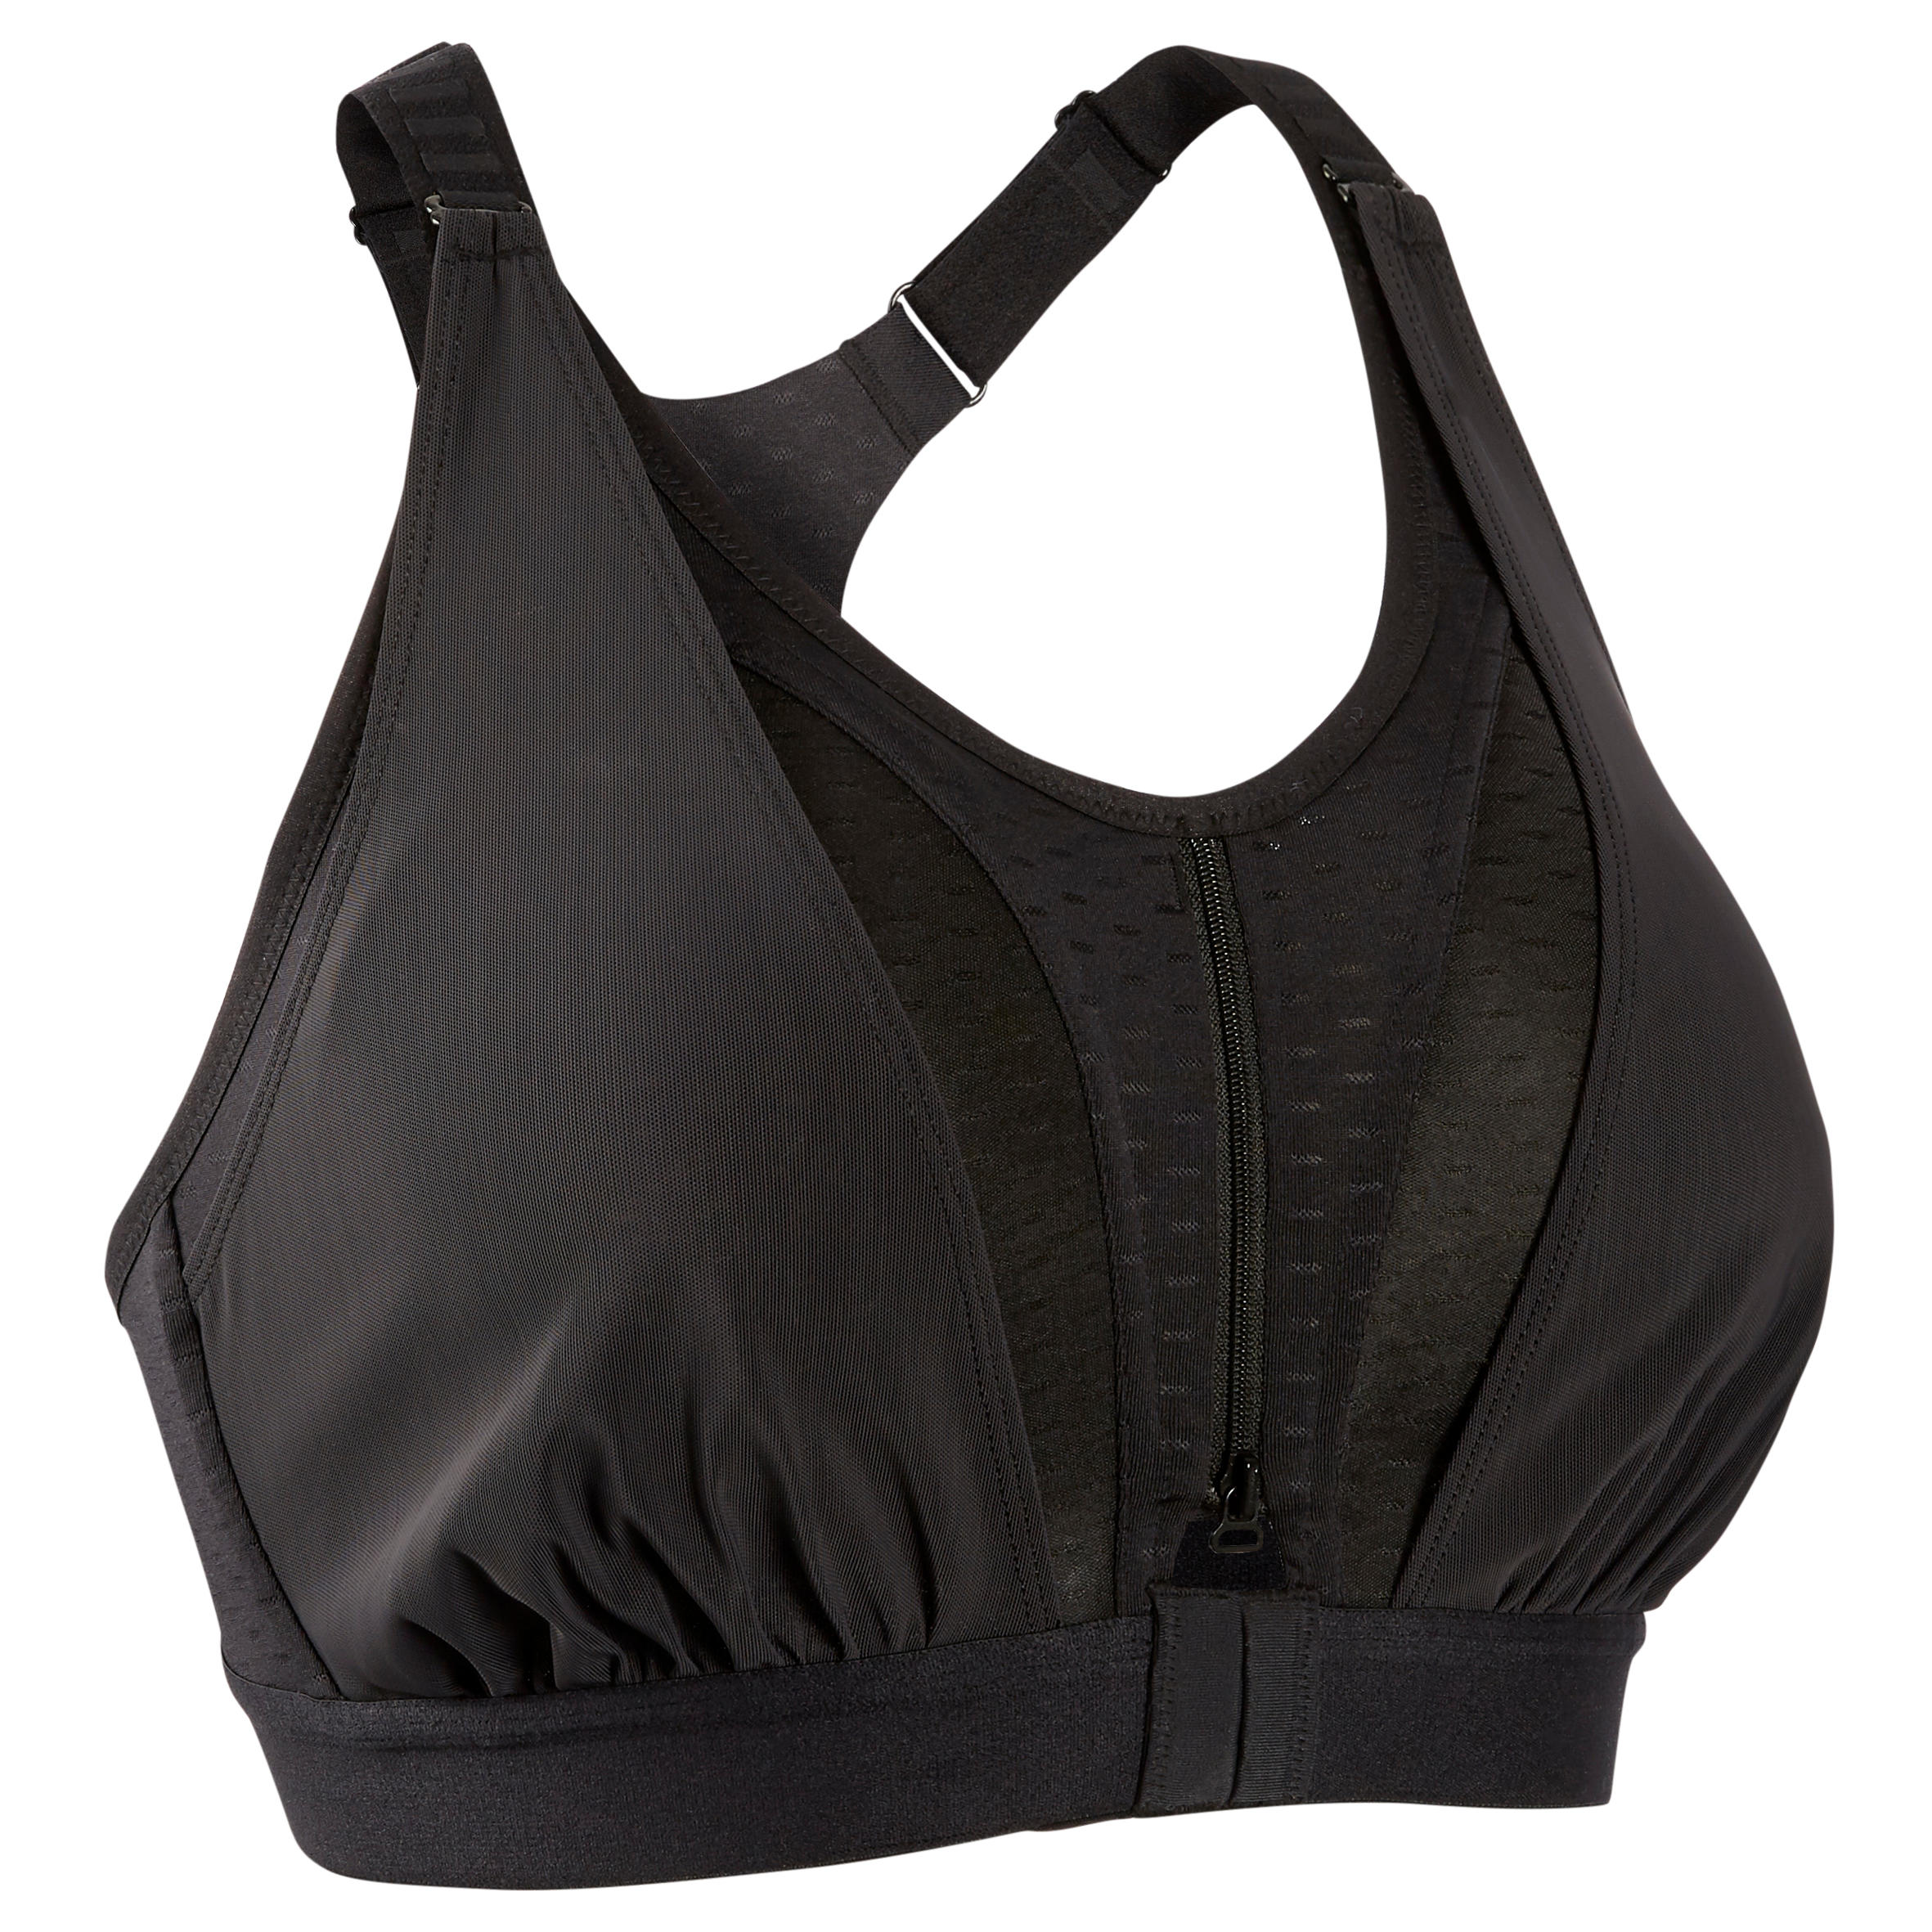 Large High-Support Fitness Bra - 960 Black - DOMYOS